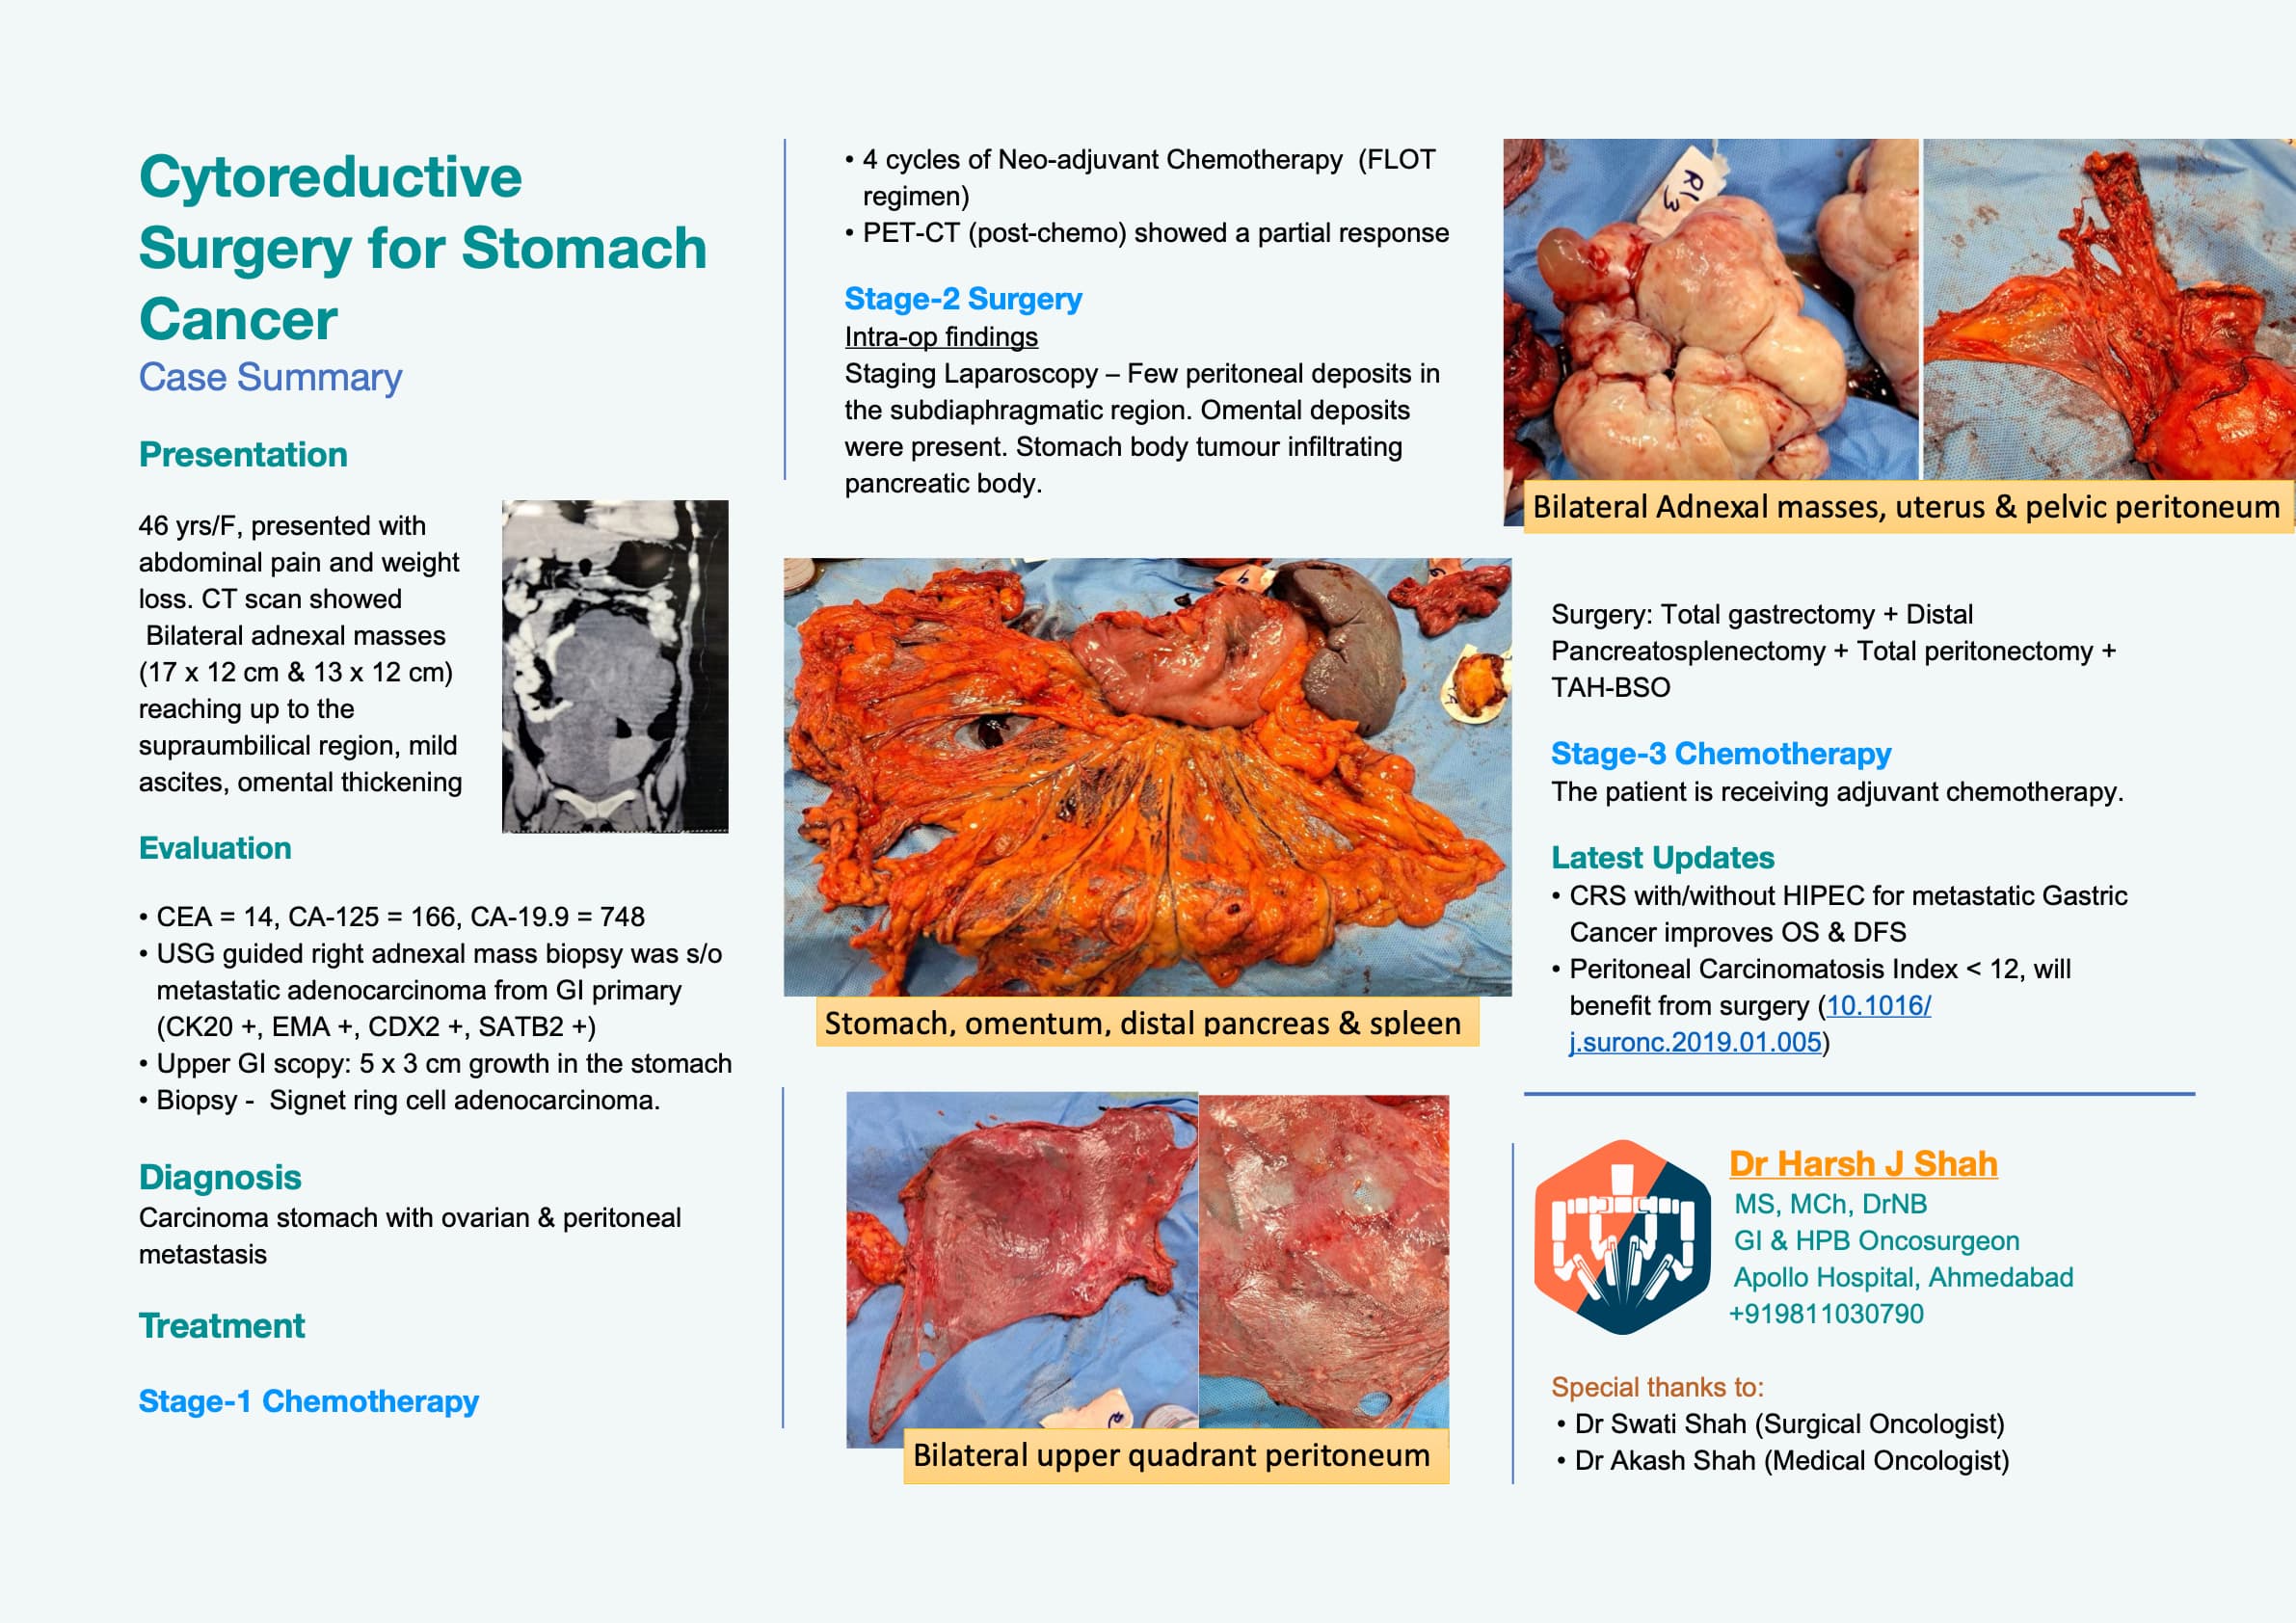 Cytoreductive Surgery for Stomach Cancer - Case Summary